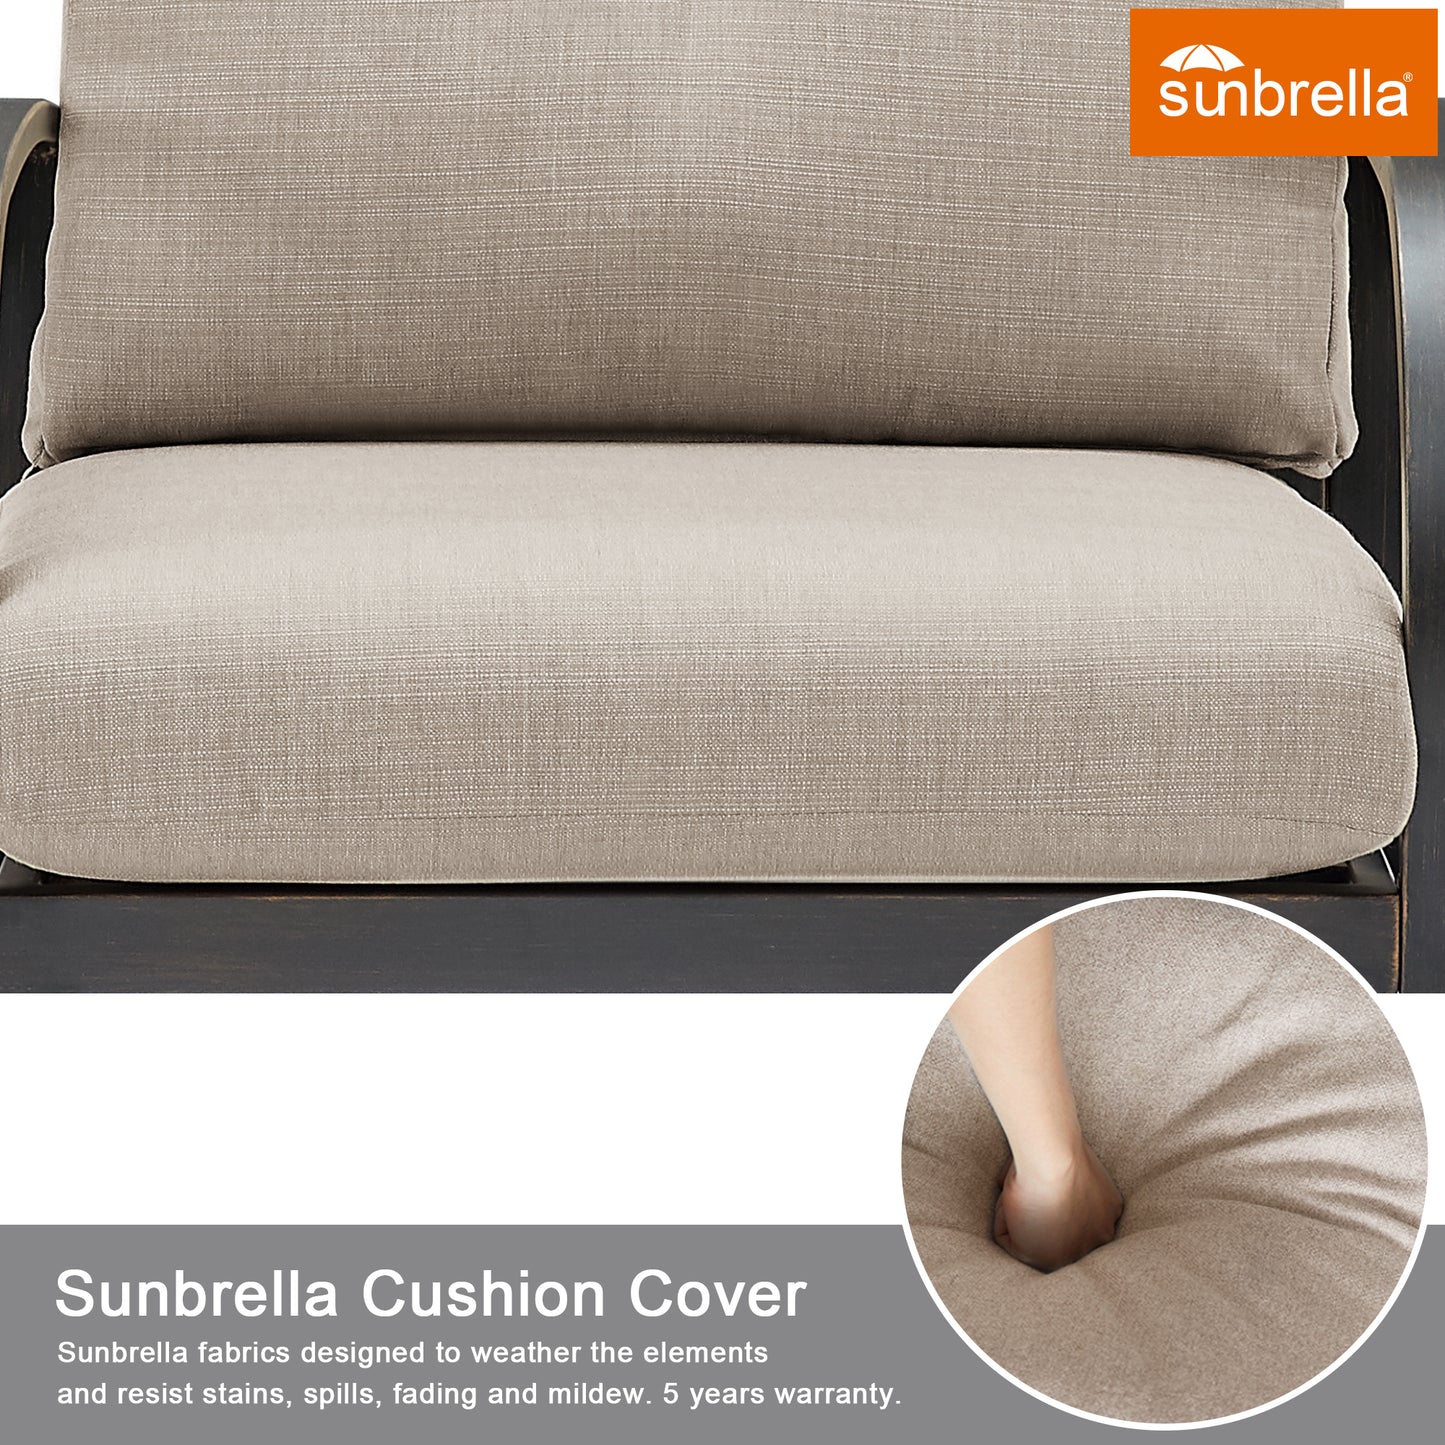 Patio All-Weather Aluminum Club Chair with Sunbrella Cushion Covers